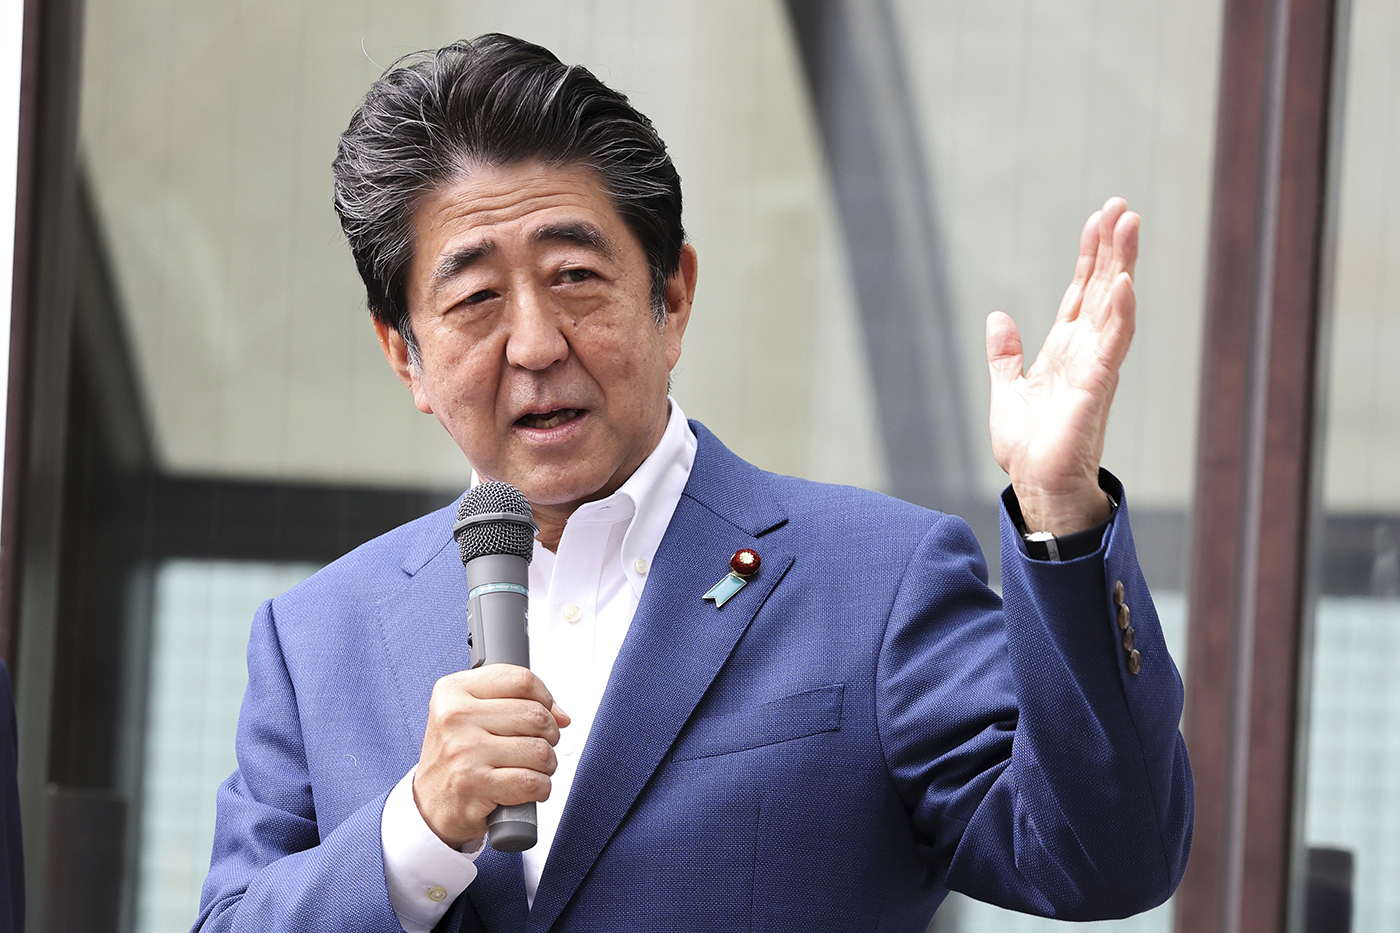 japanese man in blue suit speaking into microphone and gesturing with his hand